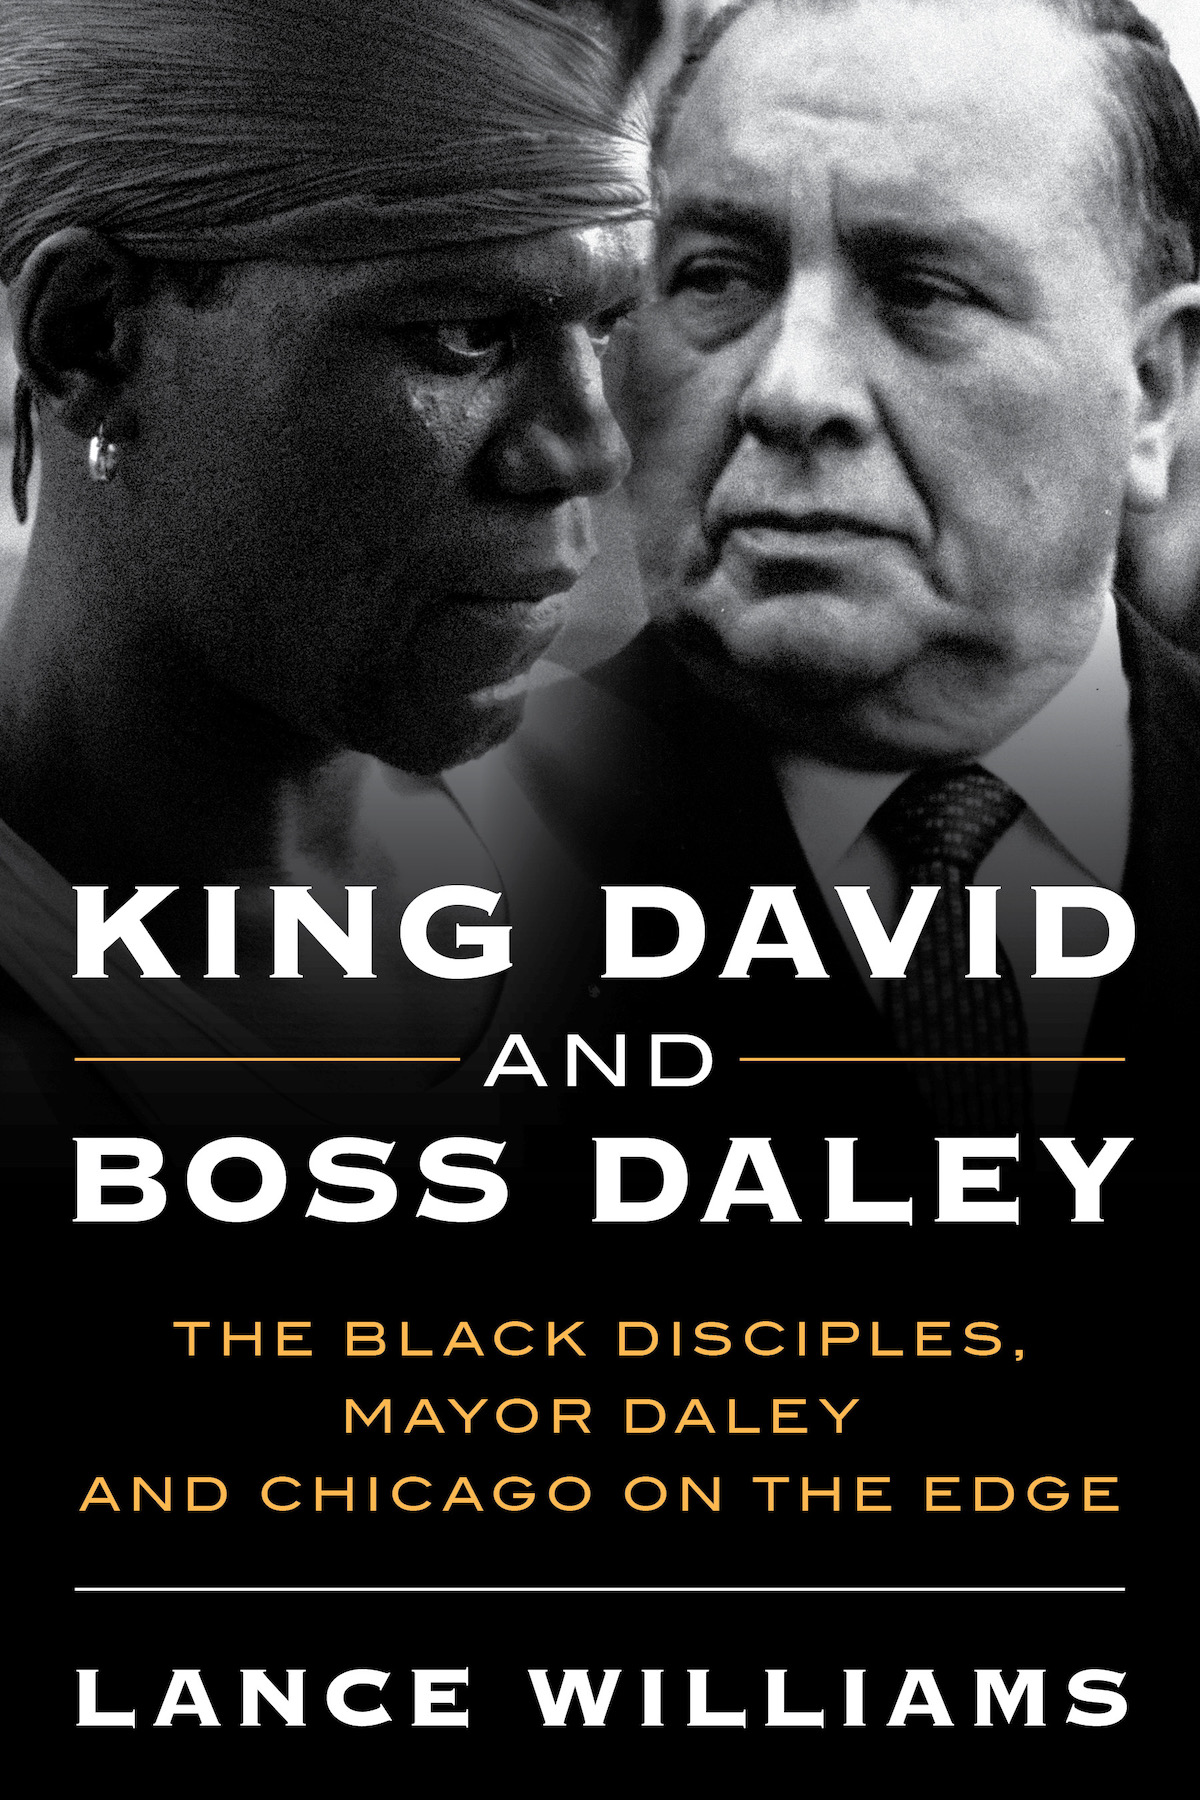 King David and Boss Daley book cover. Courtesy of Prometheus